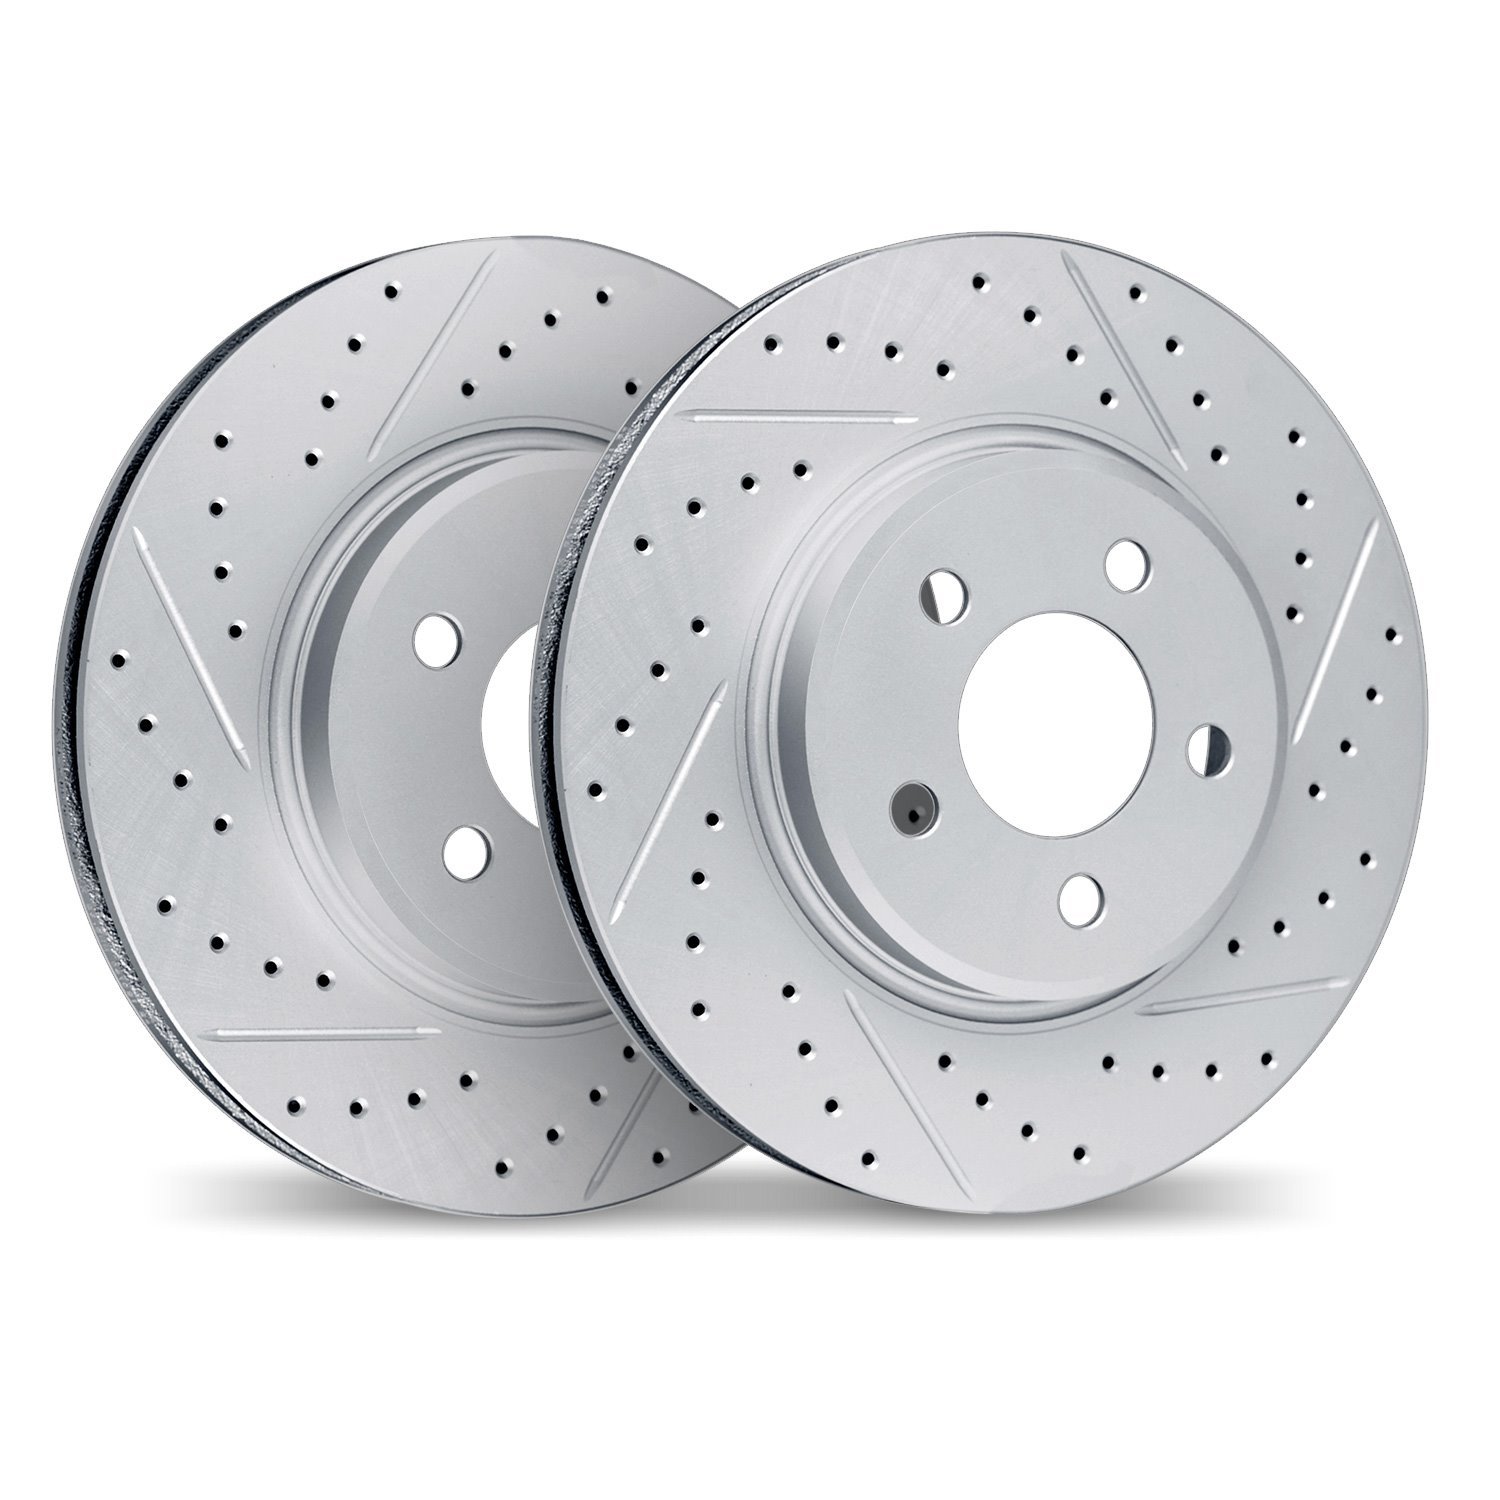 2002-54036 Geoperformance Drilled/Slotted Brake Rotors, 1997-2002 Ford/Lincoln/Mercury/Mazda, Position: Front